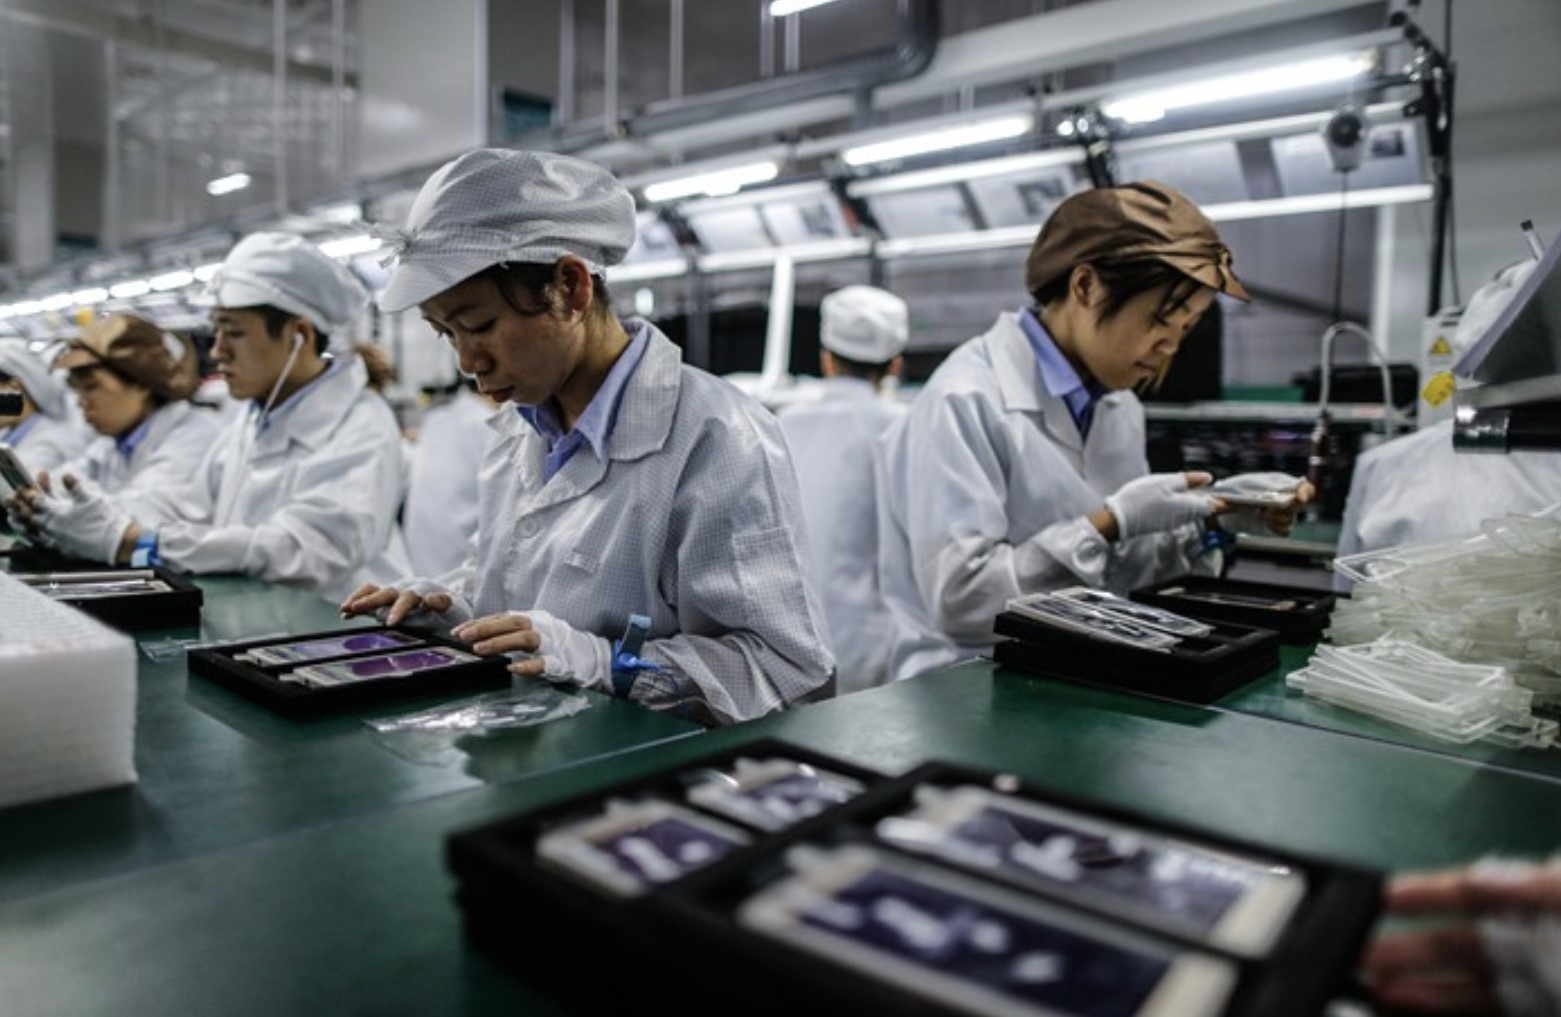 Oppo Smartphones being manufactured in Chinese factory in Coronavirus affected area